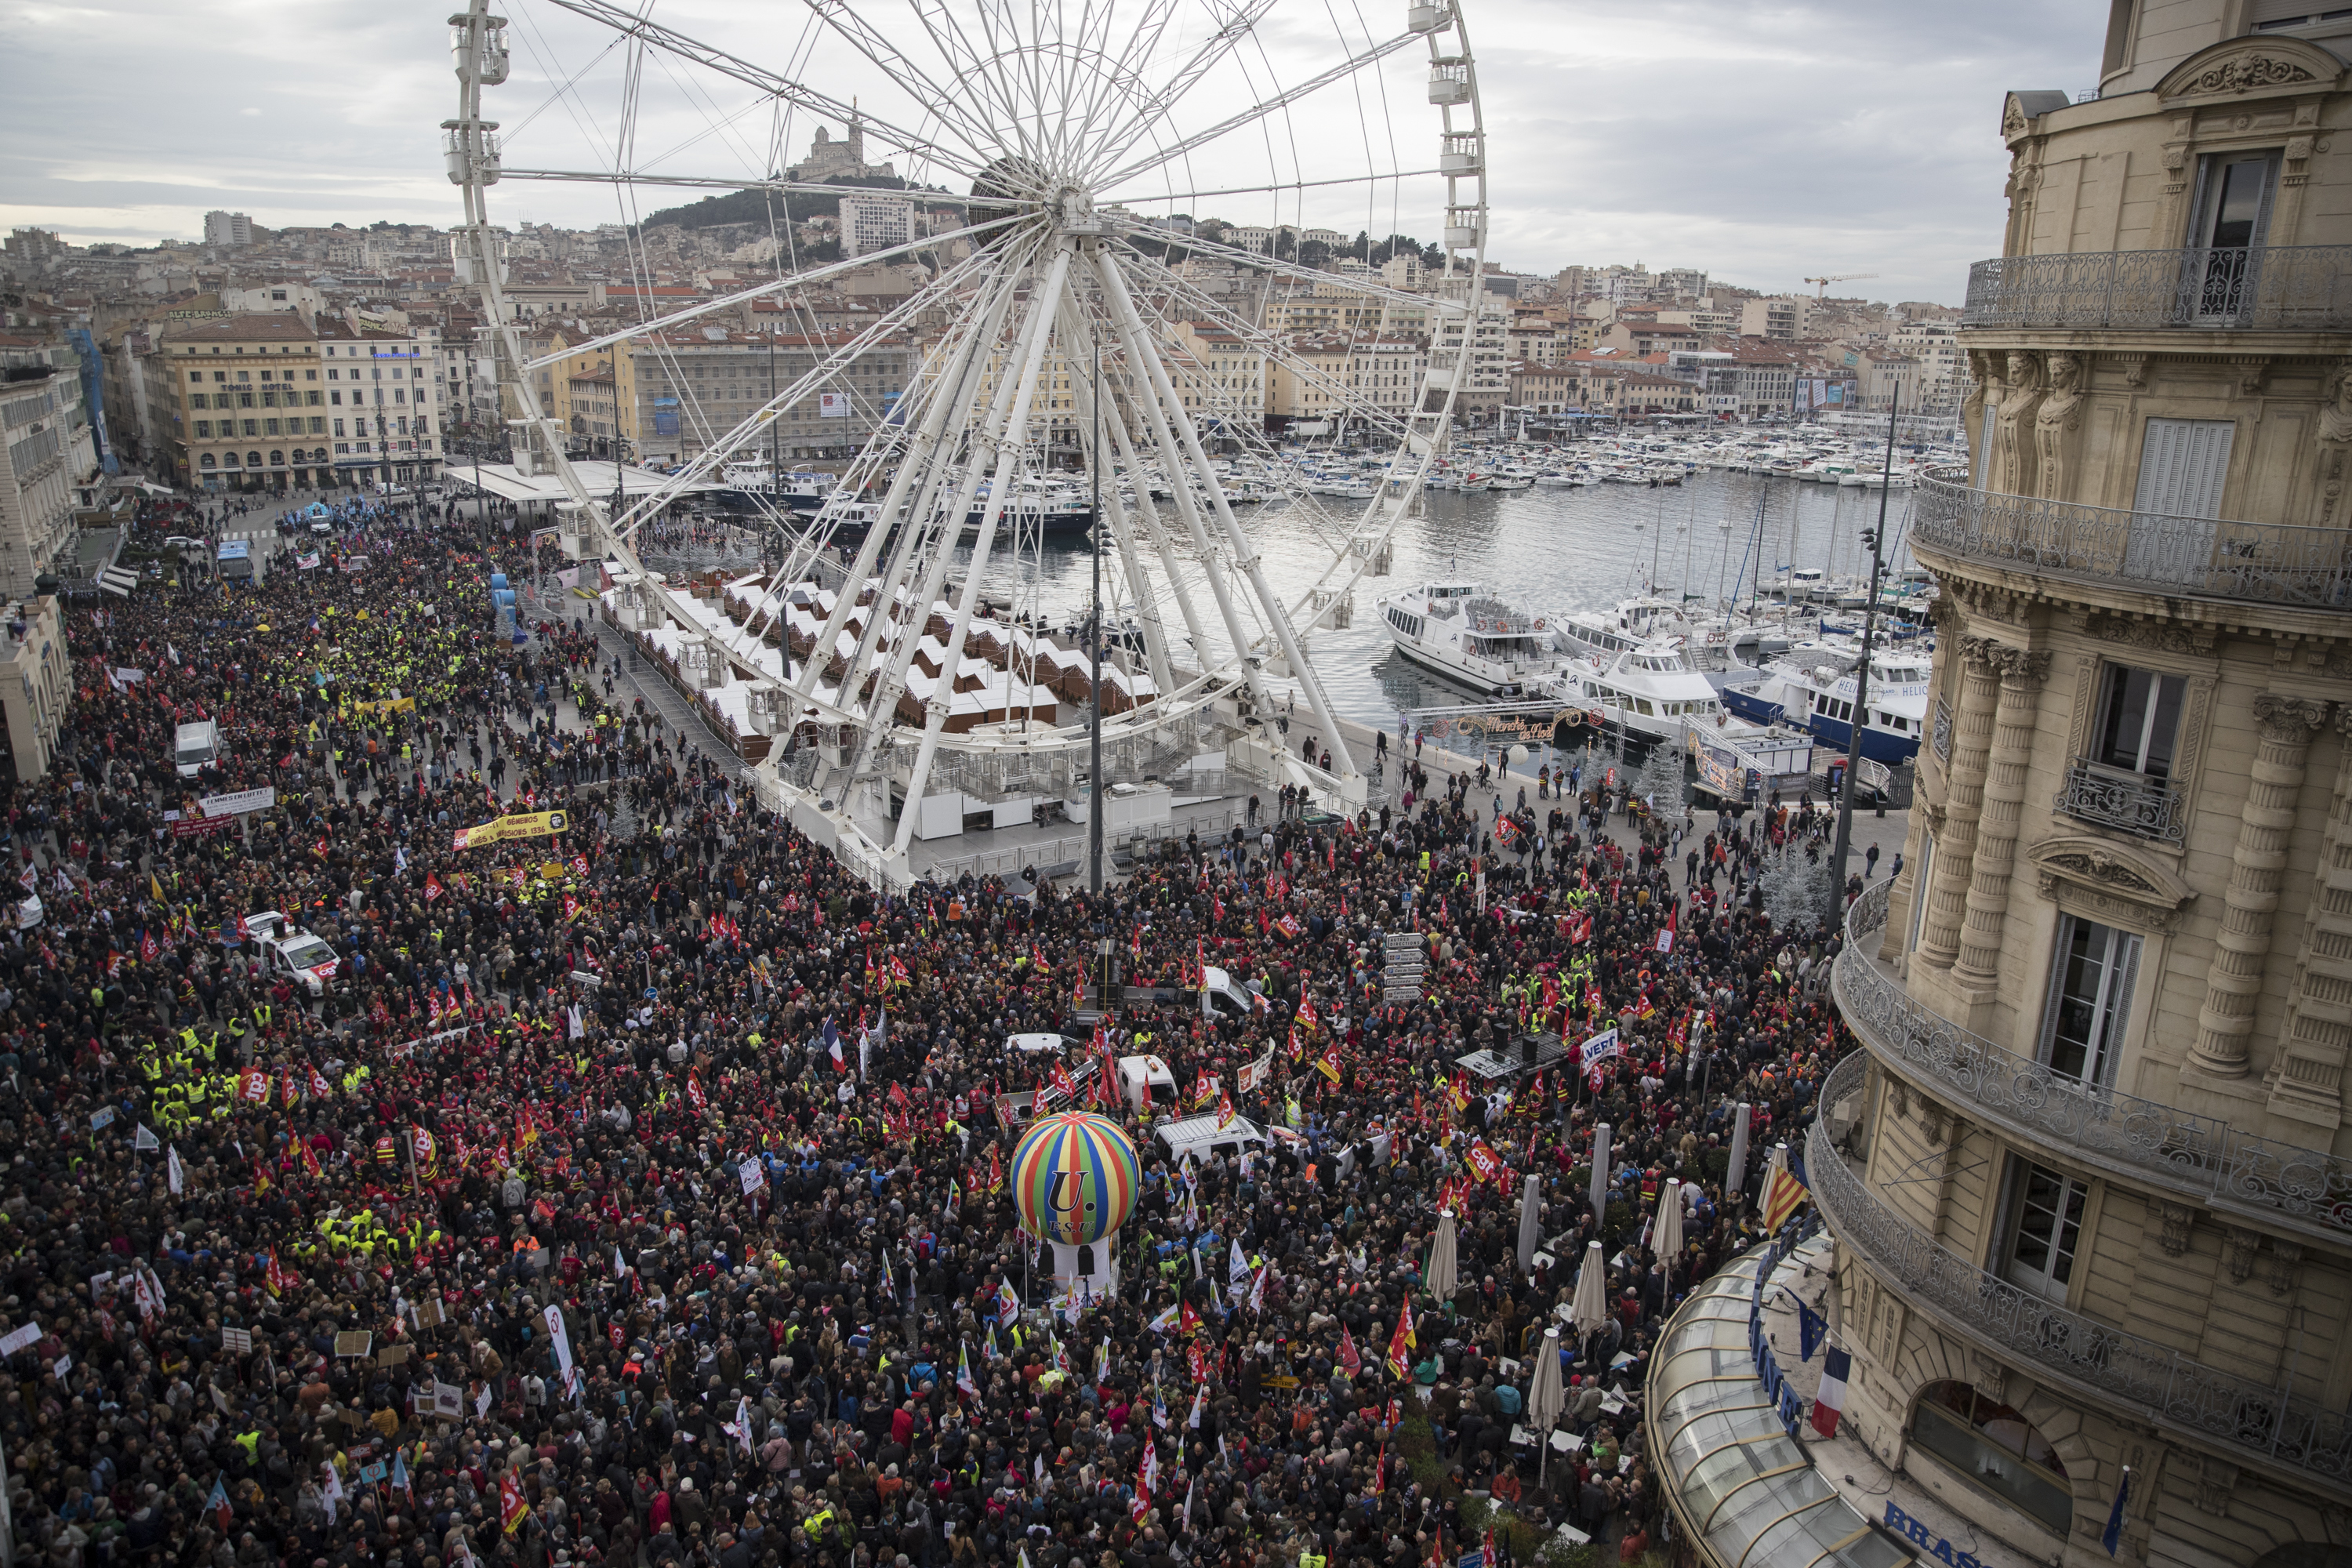 Protesters march during a mass stirke in the Old Port of Marseille, southern France, Wednesday, Dec. 5, 2019. Workers across the public sector fear President Emmanuel Macron's reform will force them to work longer and shrink their pensions. AP Photo/Daniel Cole)